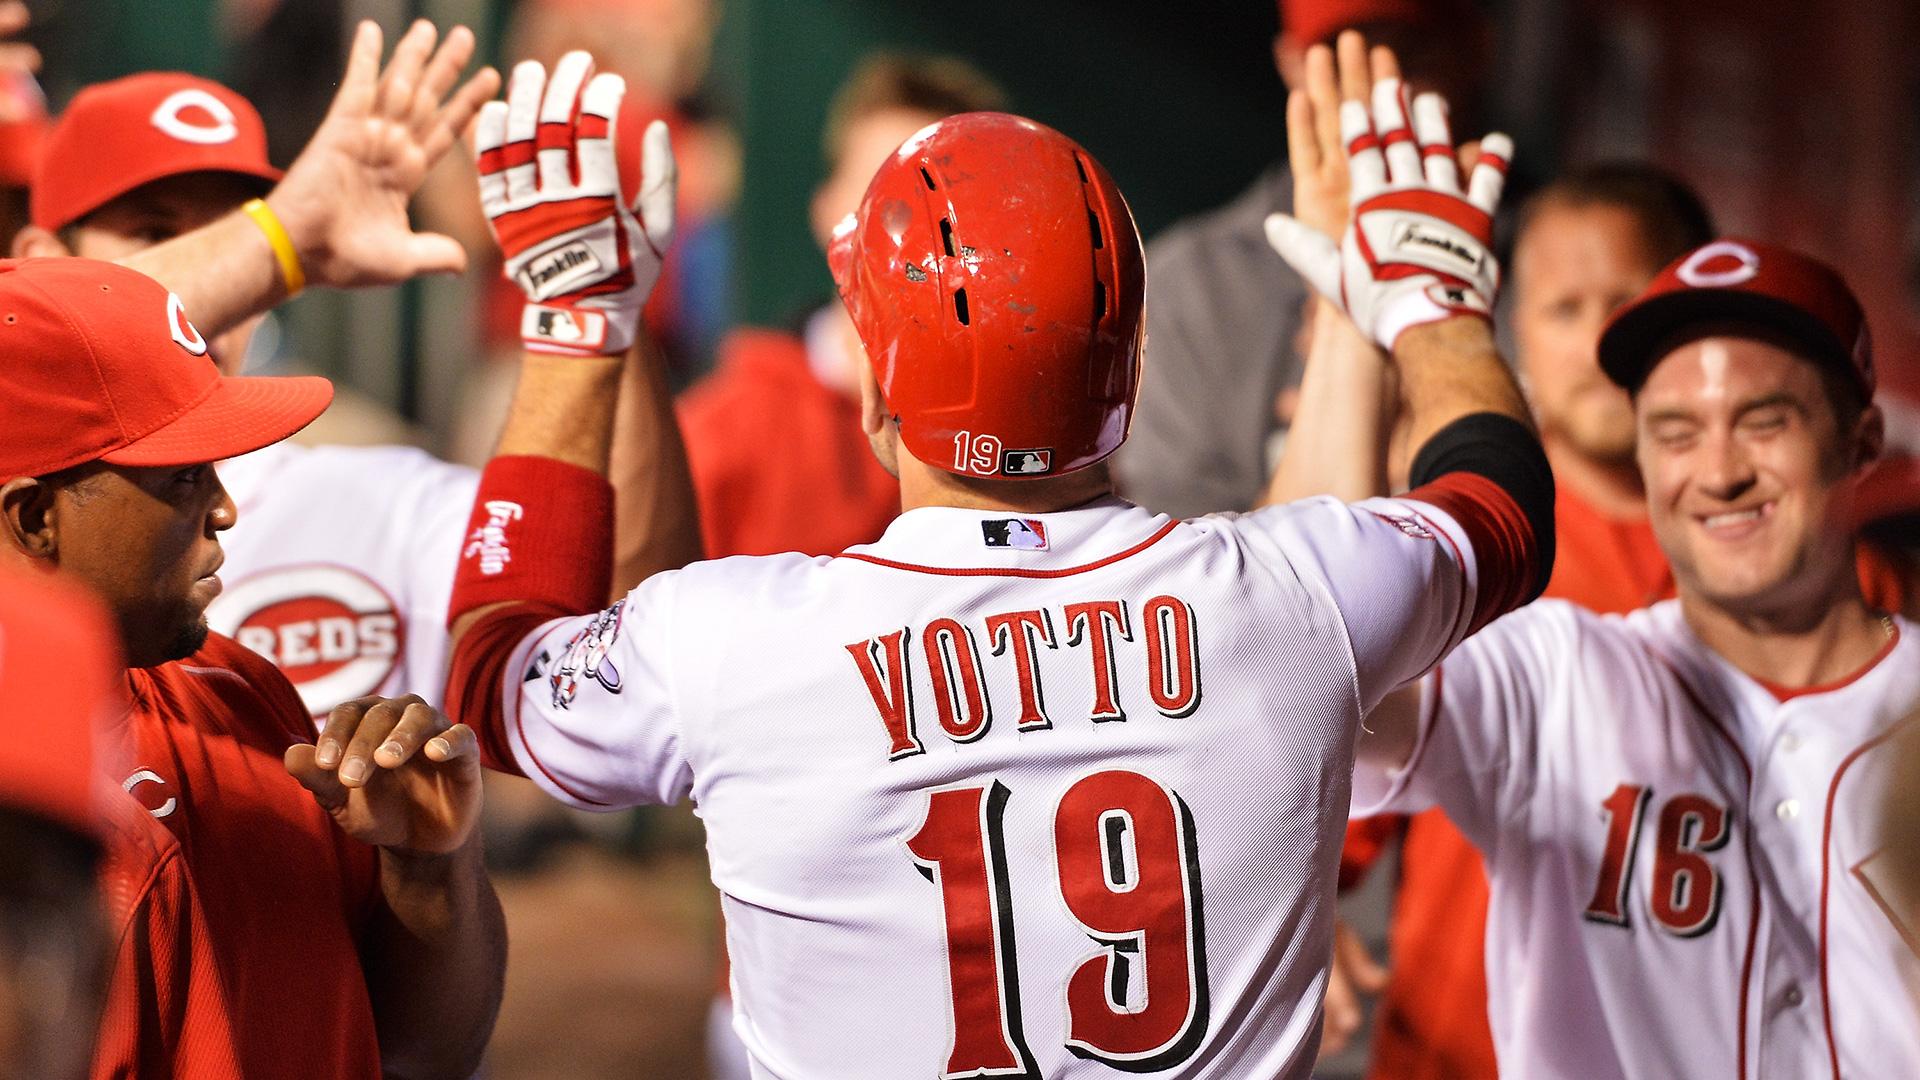 The rest of this season could make or break Joey Votto's Hall